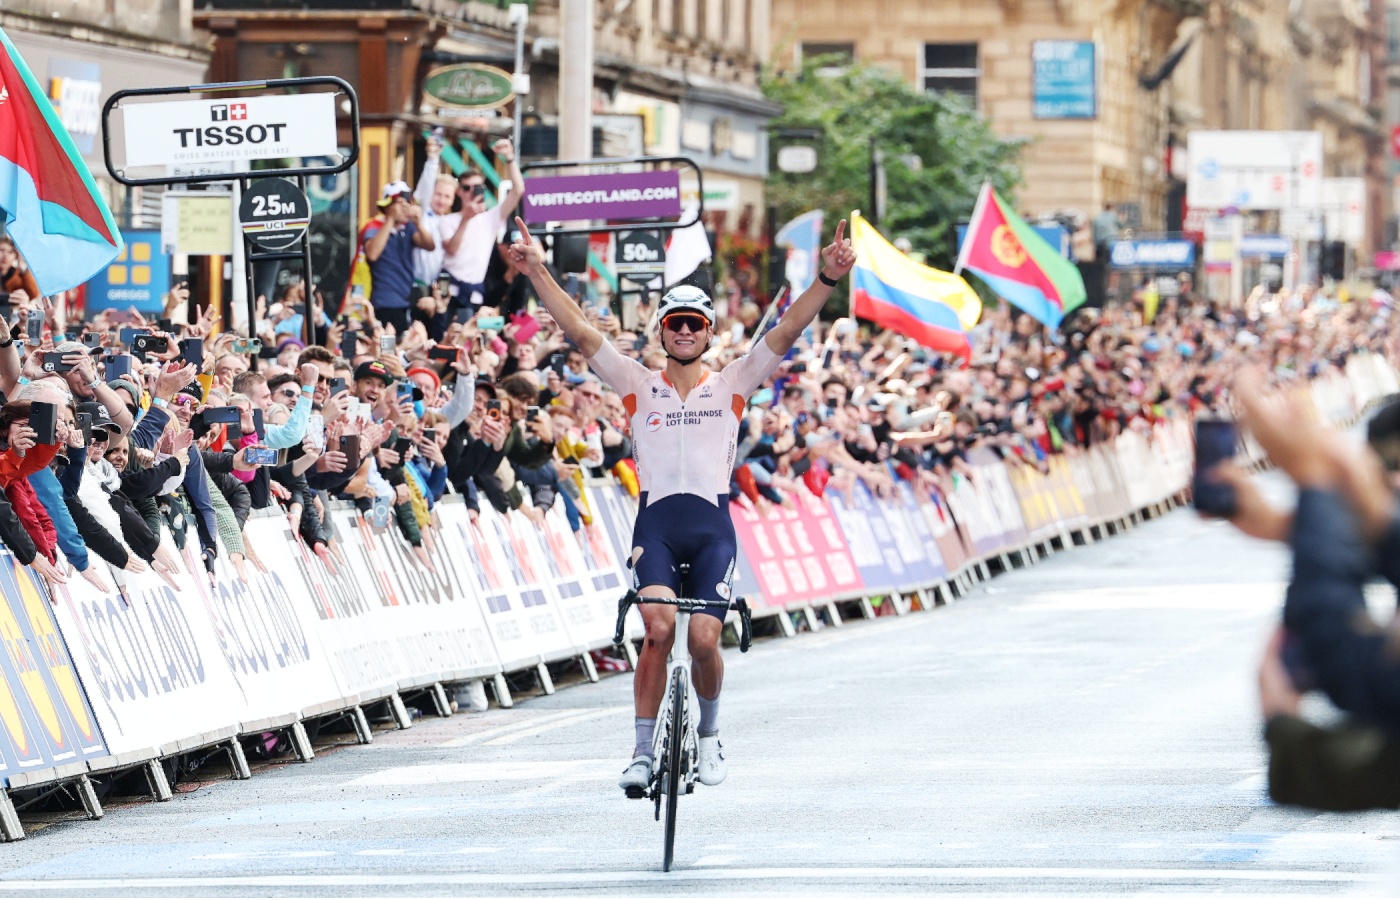 Mathieu Van der Poel of the Netherlands celebrates winning the UCI Cycling Championship men's elite road race in Glasgow.